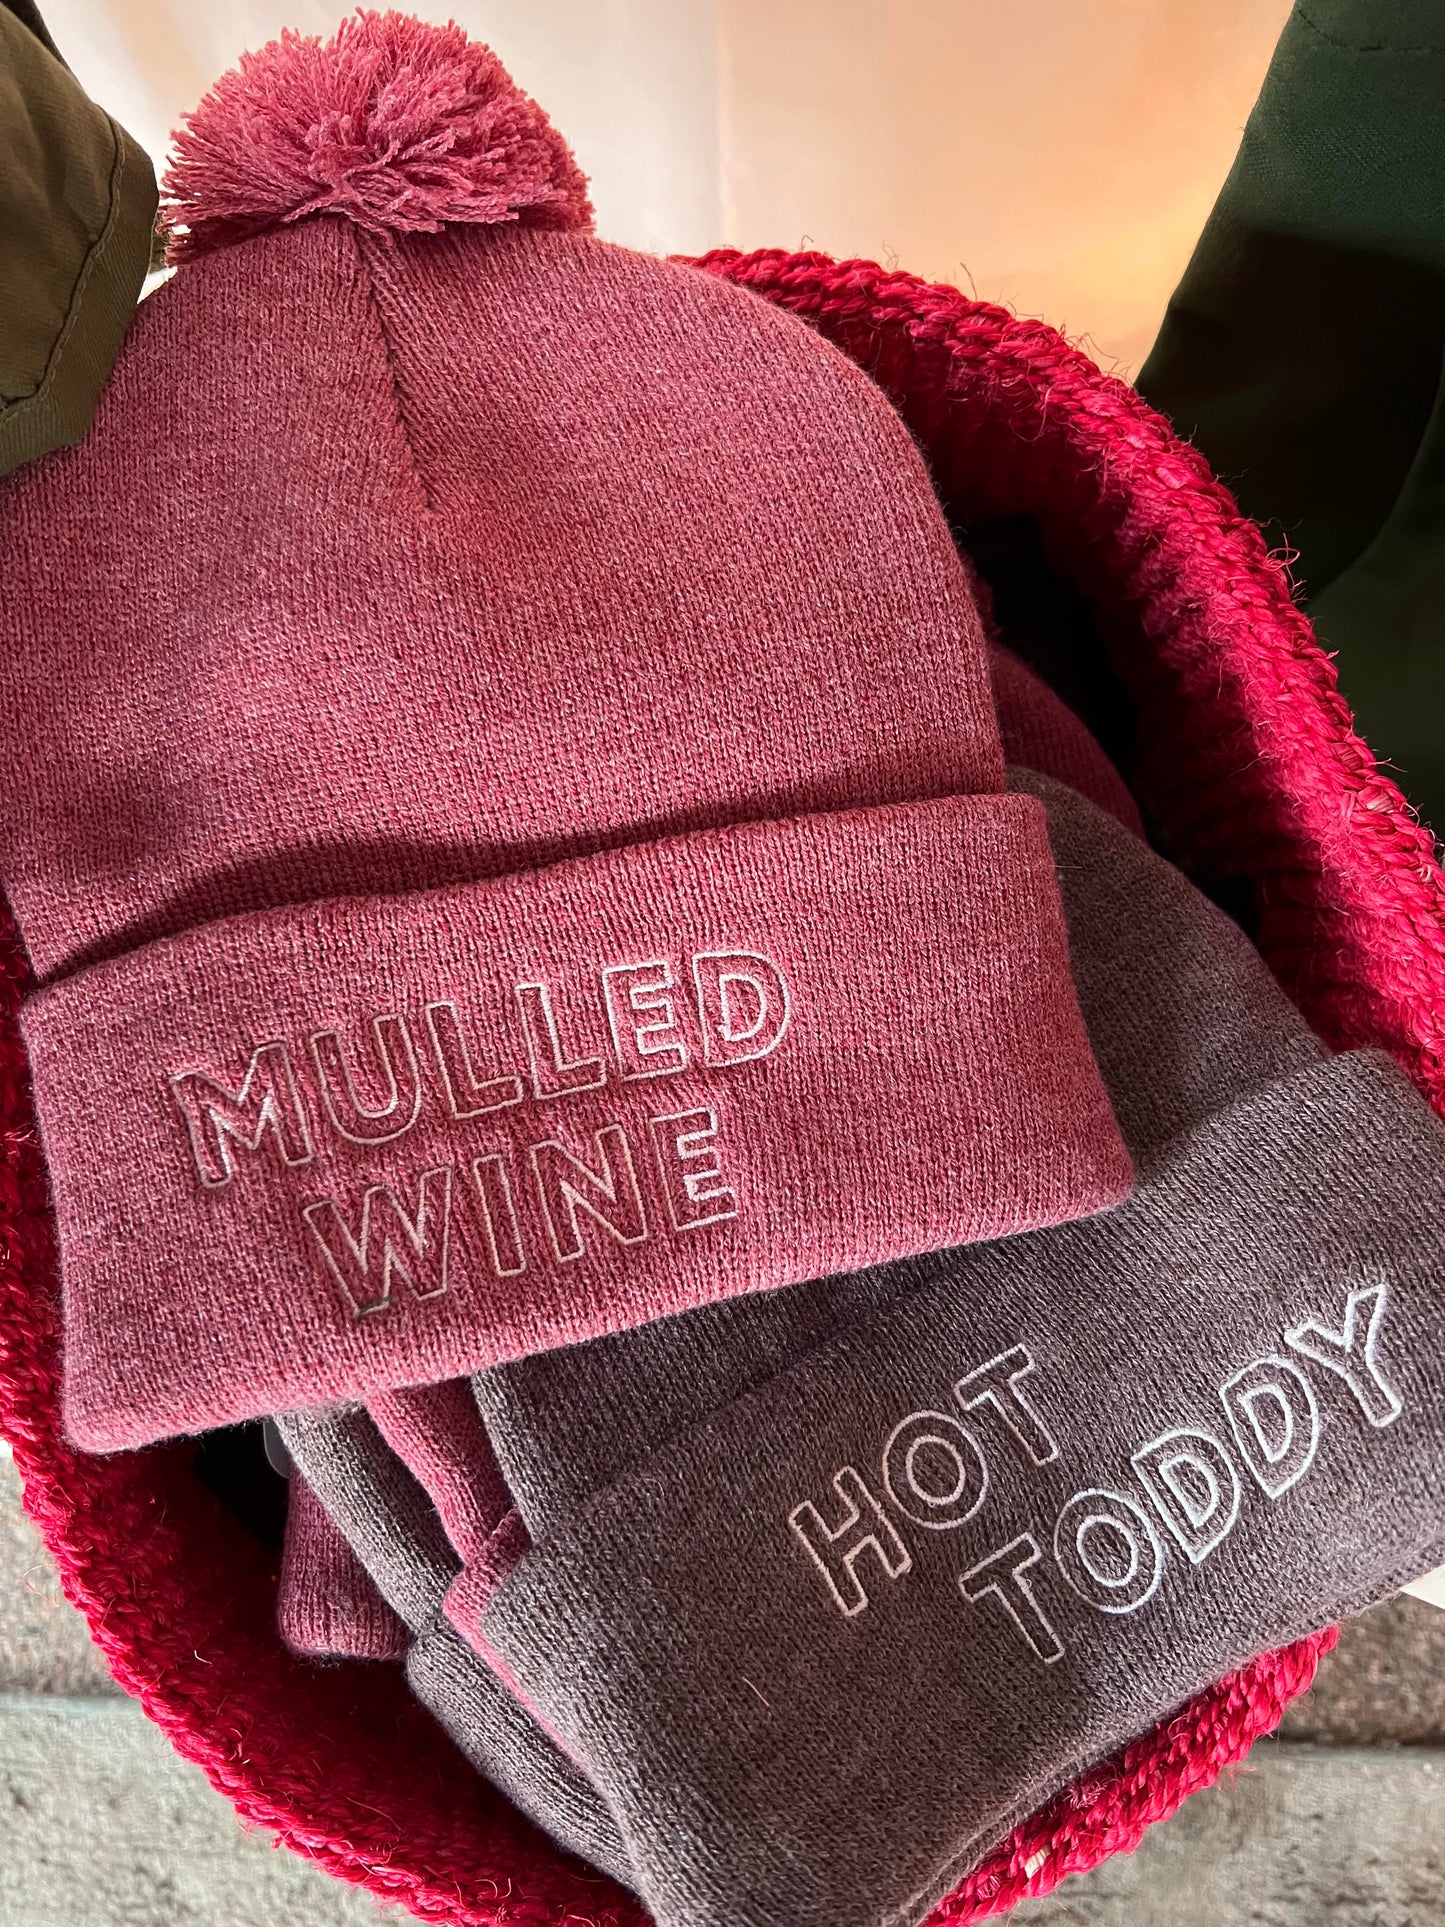 A pink beanie with the words Mulled Wine in white embroidery and a brown beanie with the words Hot Toddy in white embroidery